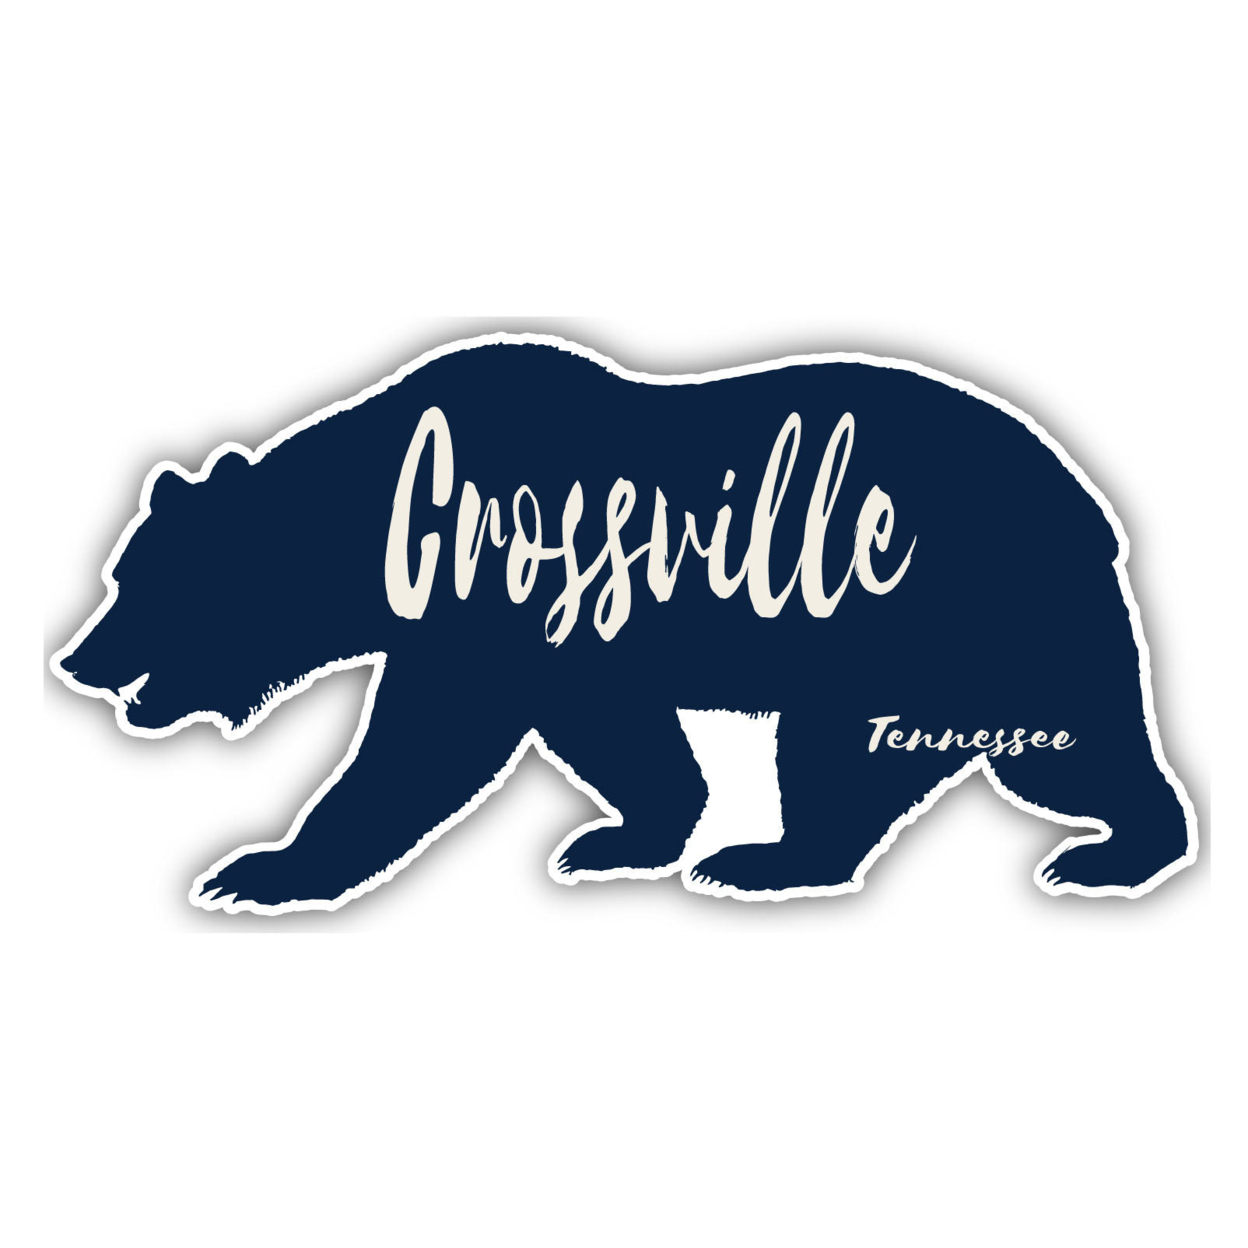 Crossville Tennessee Souvenir Decorative Stickers (Choose Theme And Size) - Single Unit, 6-Inch, Bear